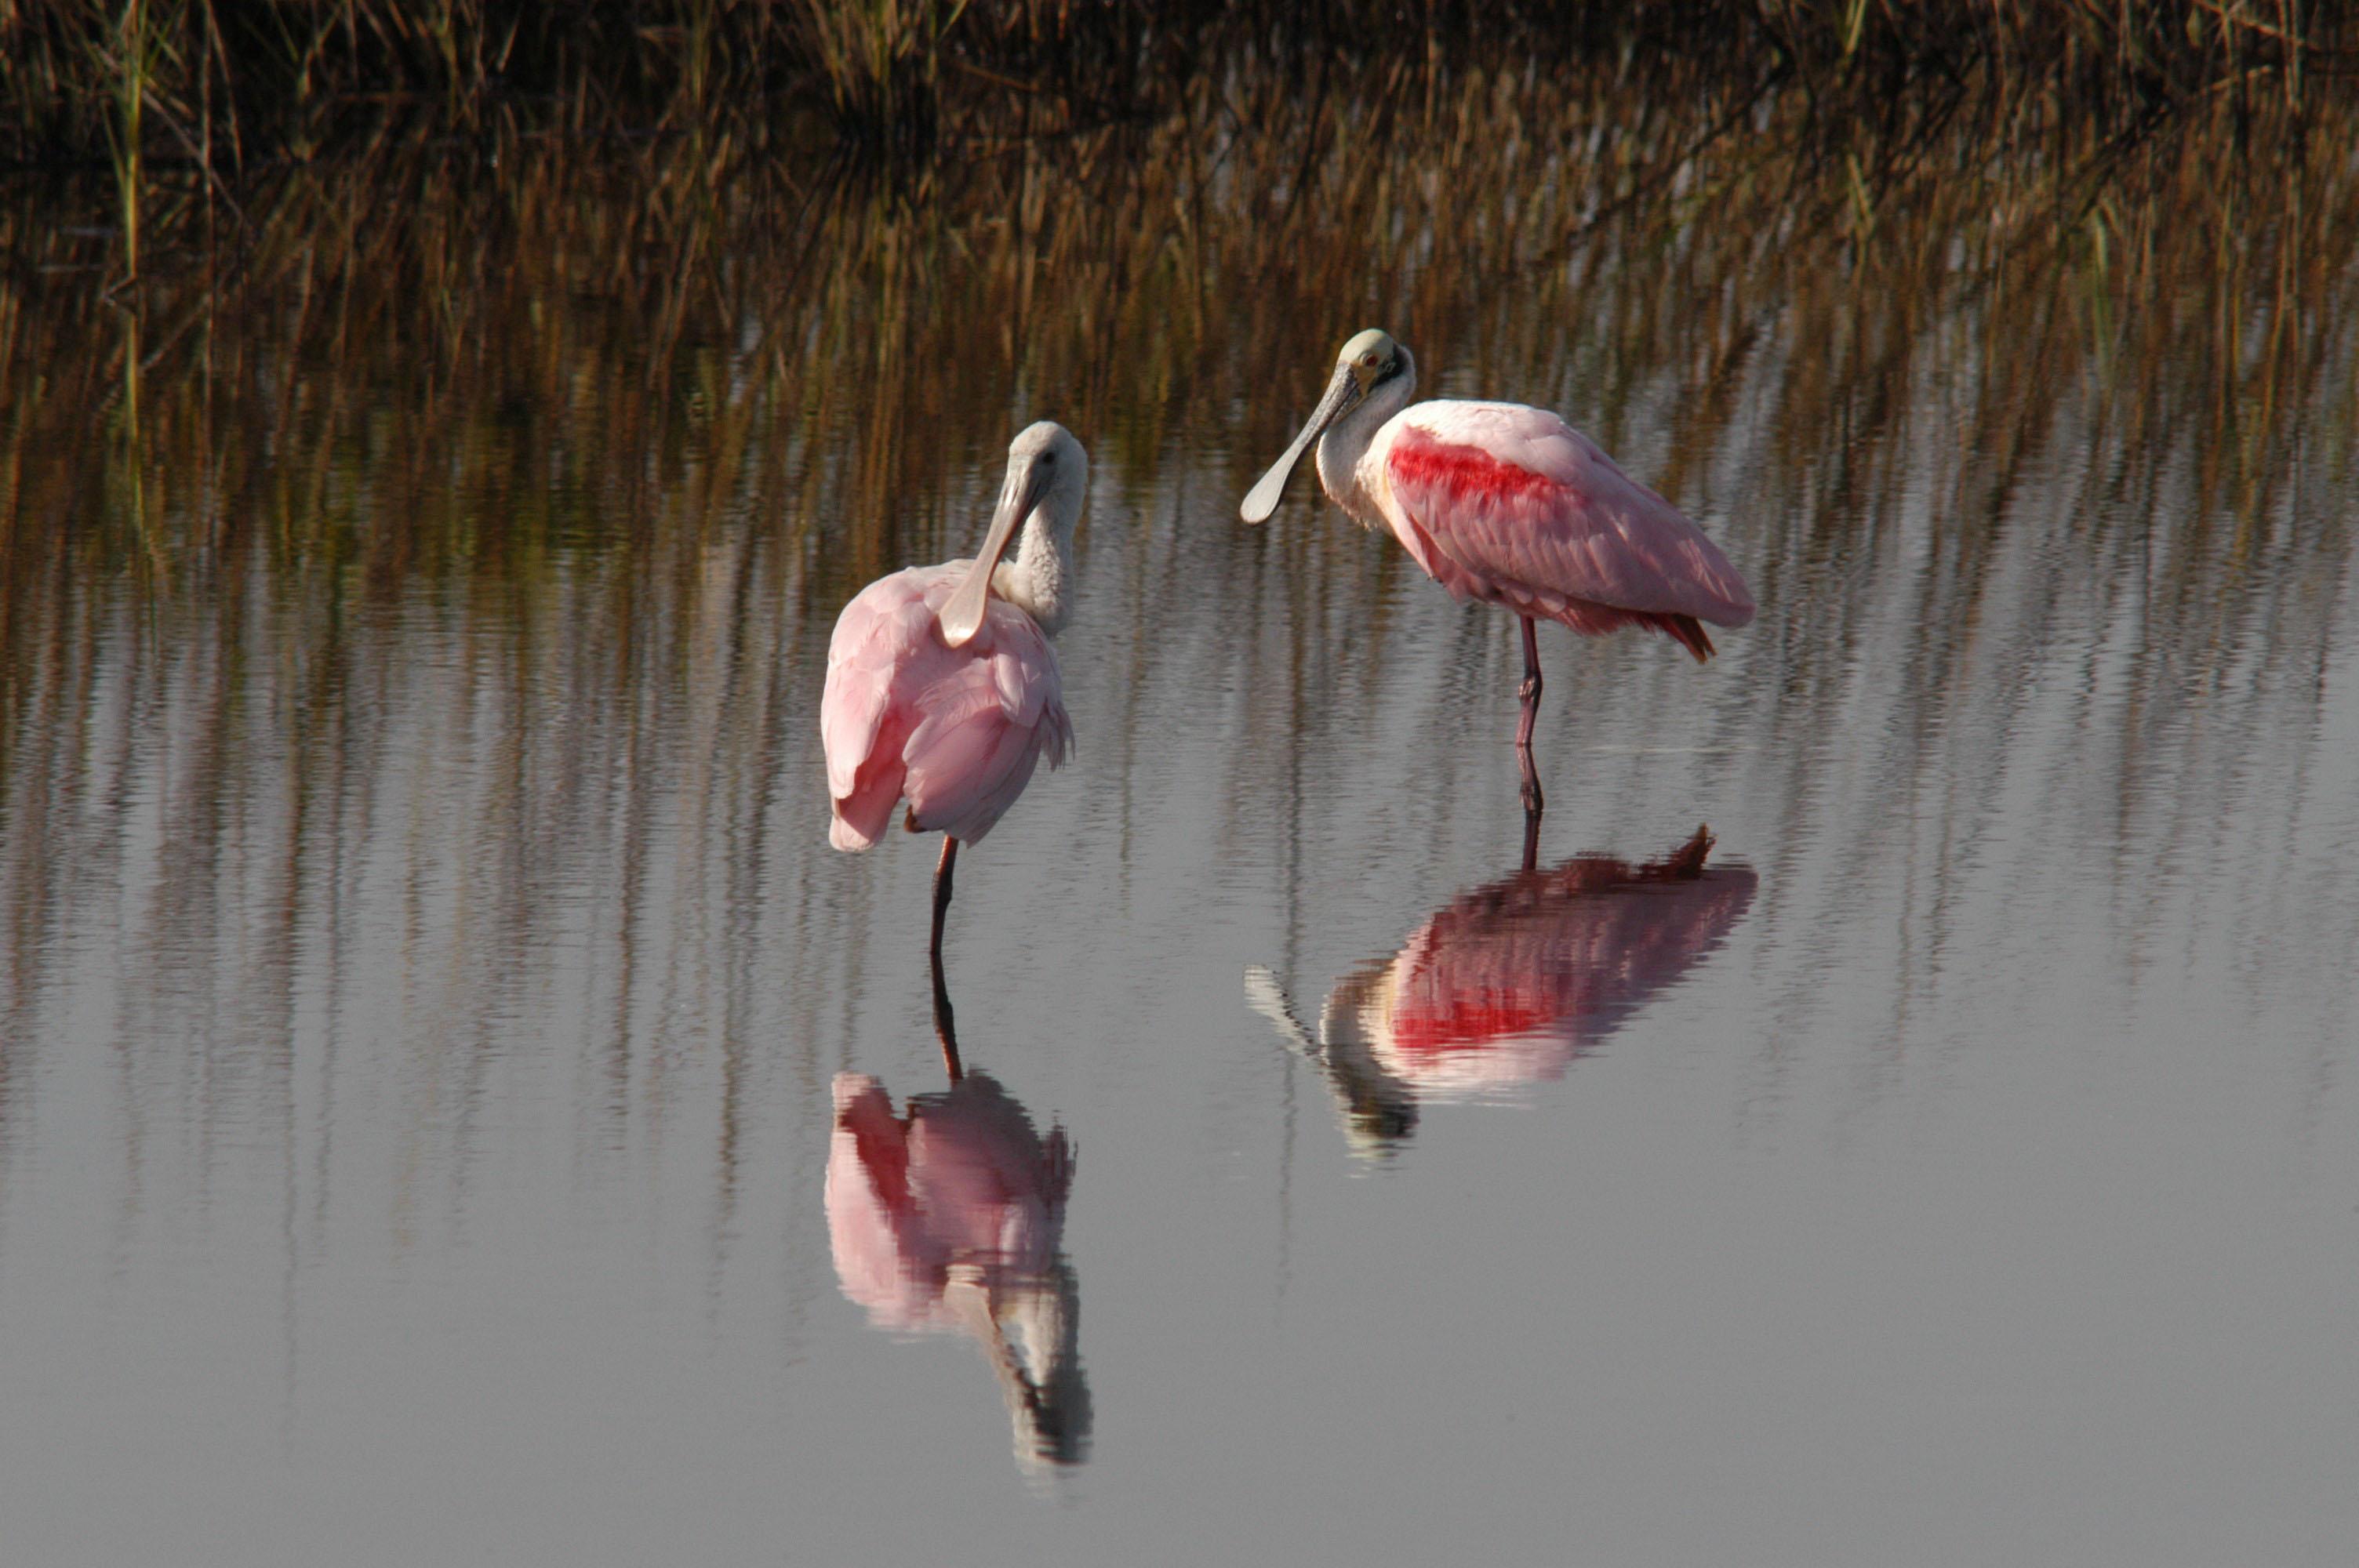 Two roseate spoonbills stand at the edge of a pond. The birds are pink, with distinctive long, spoon-shaped bills and thin legs. The male (right) has a bright slash of red coloring above its wing. The water is gray and bordered by reed-like plants.